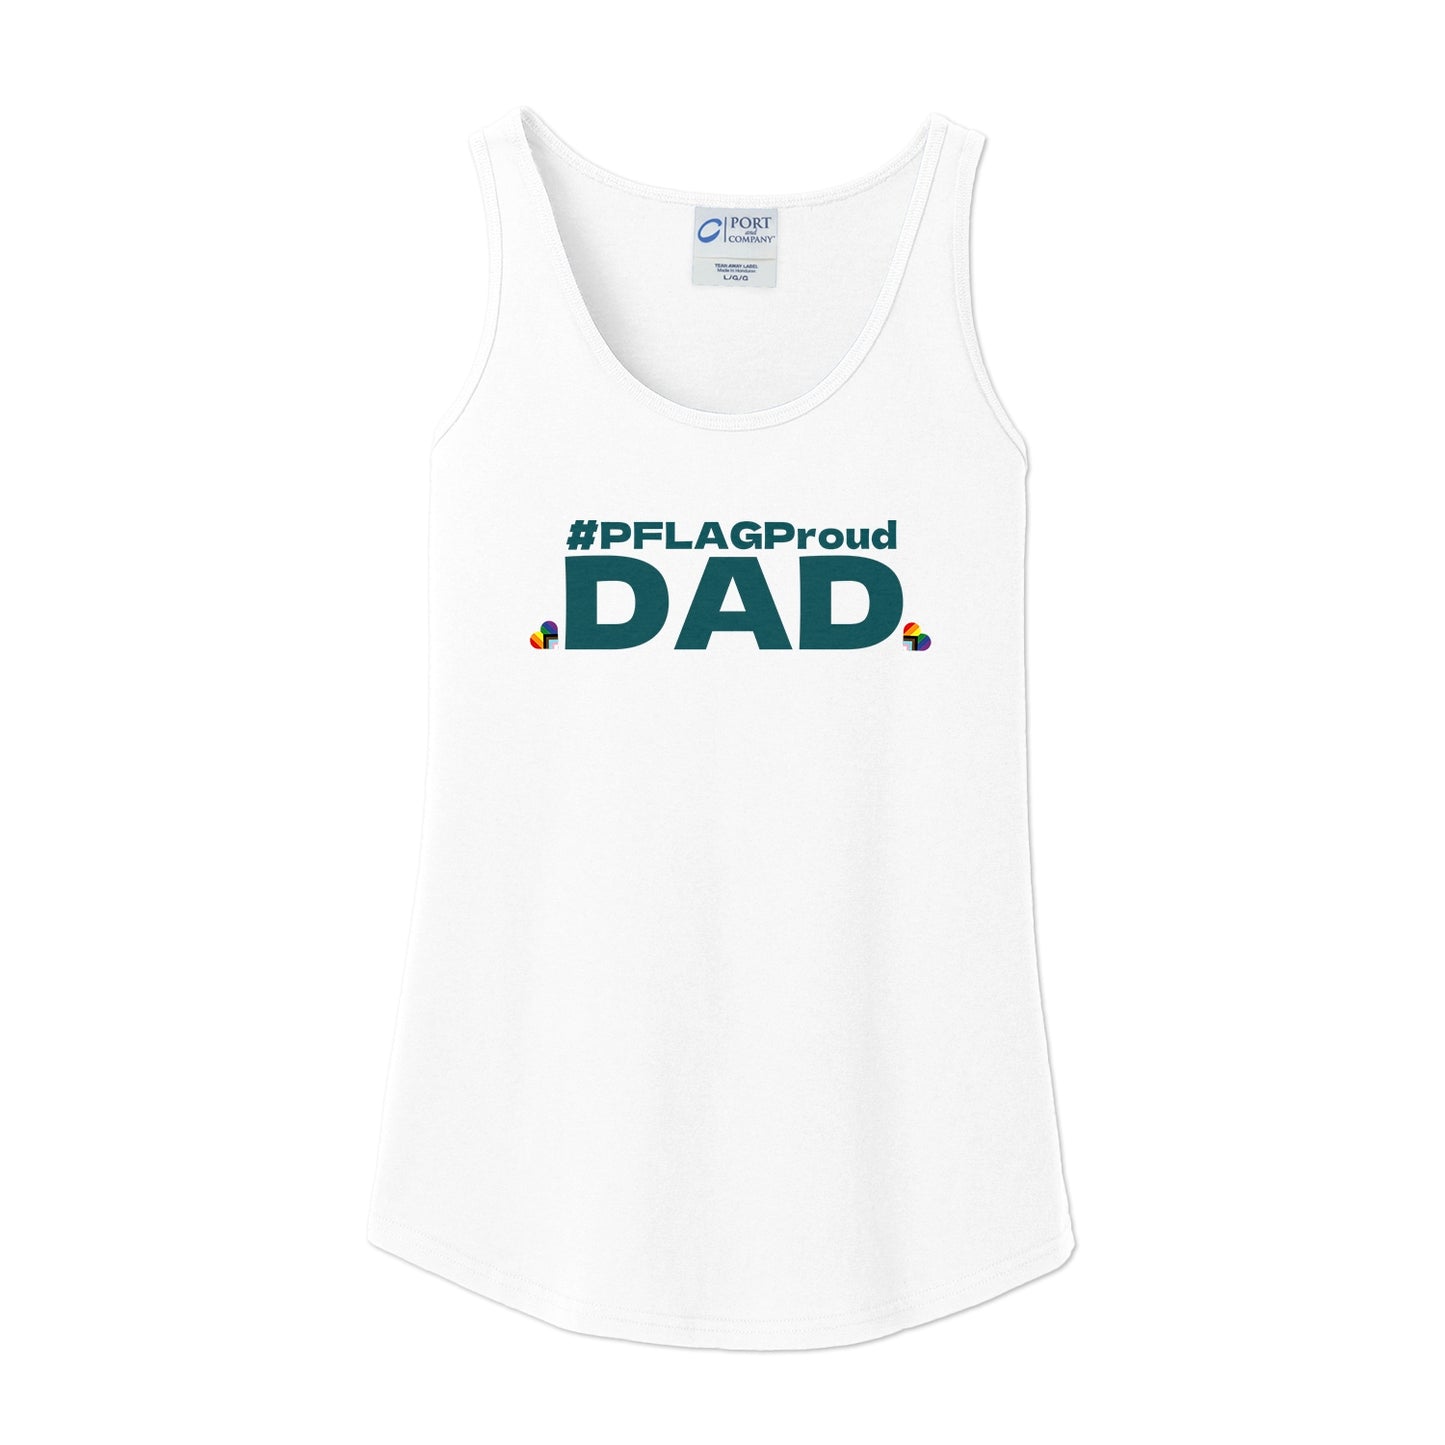 #PFLAGProud Dad - Fitted Cut Tank Top